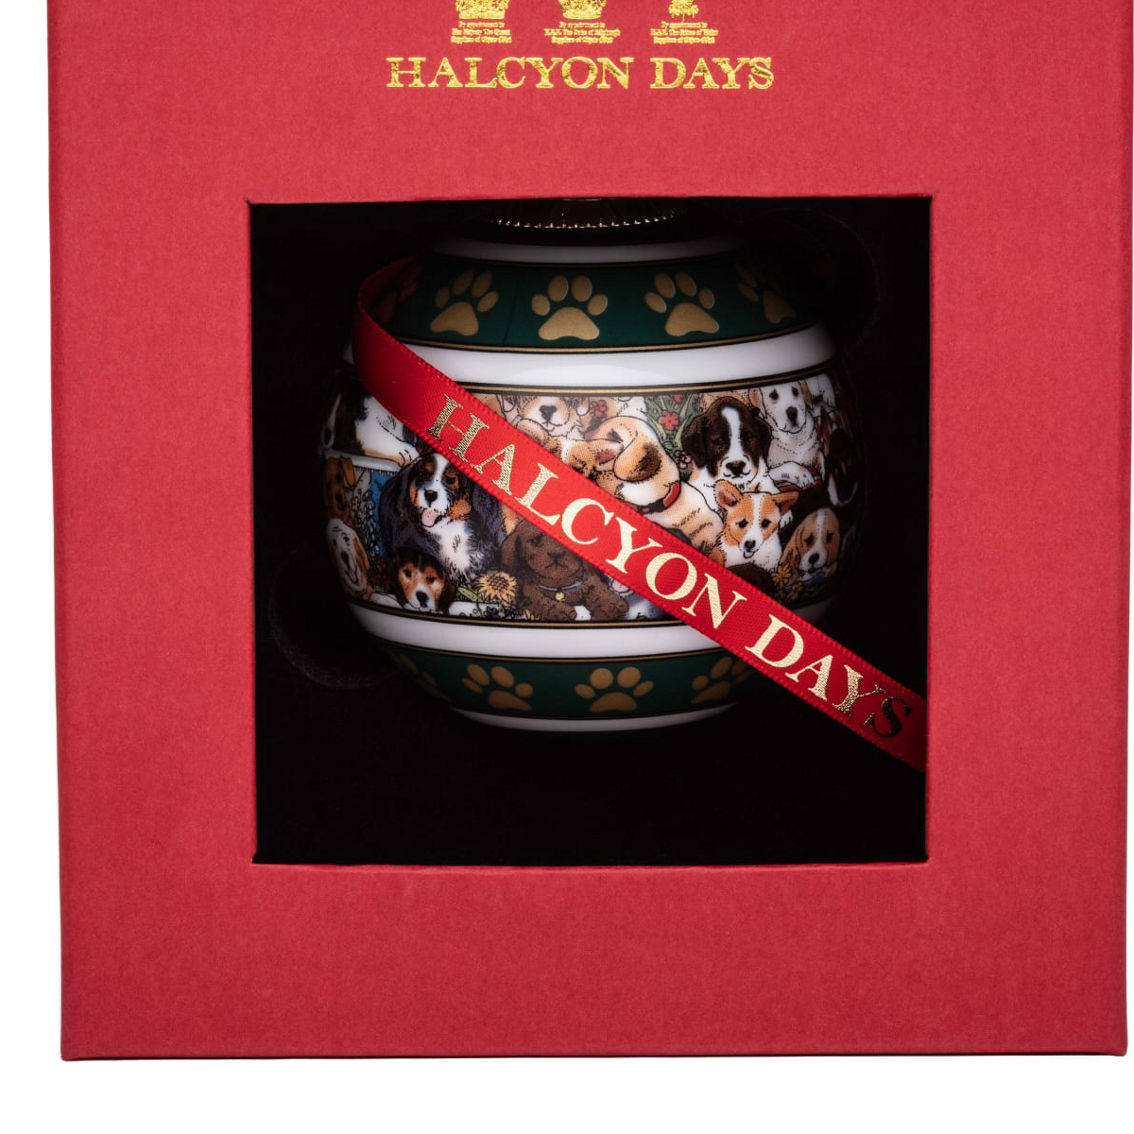 Halcyon Days Dogs leave Paw Prints Ornament - Image 2 of 2